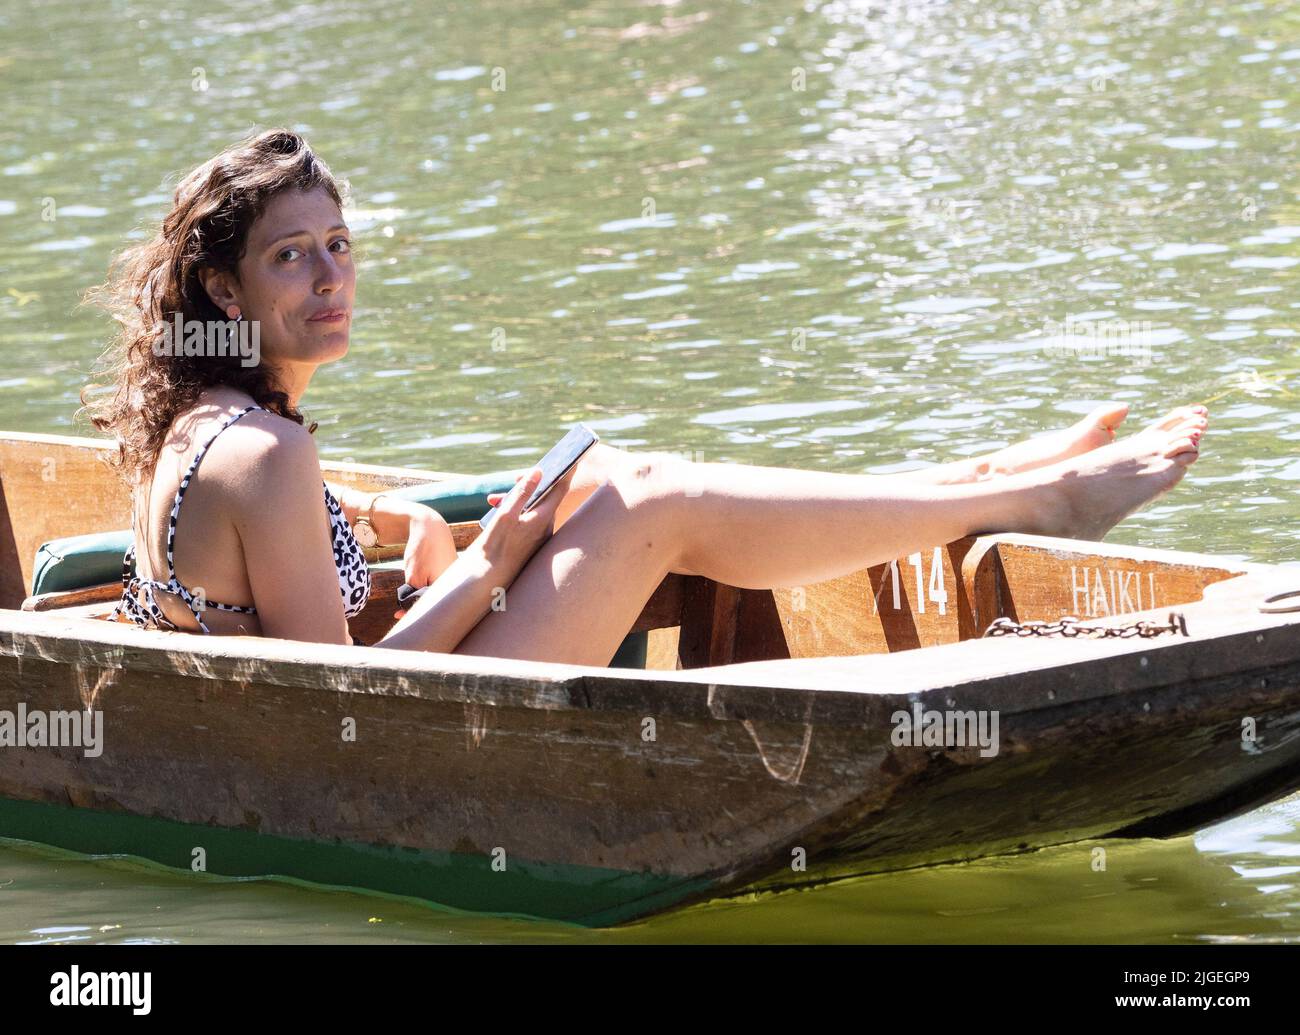 Cambridge, UK 10th July 2022. Tourists enjoy the hot Sunday weather punting on the River Cam in Cambridge. Credit: Headlinephoto/Alamy Live News. Stock Photo